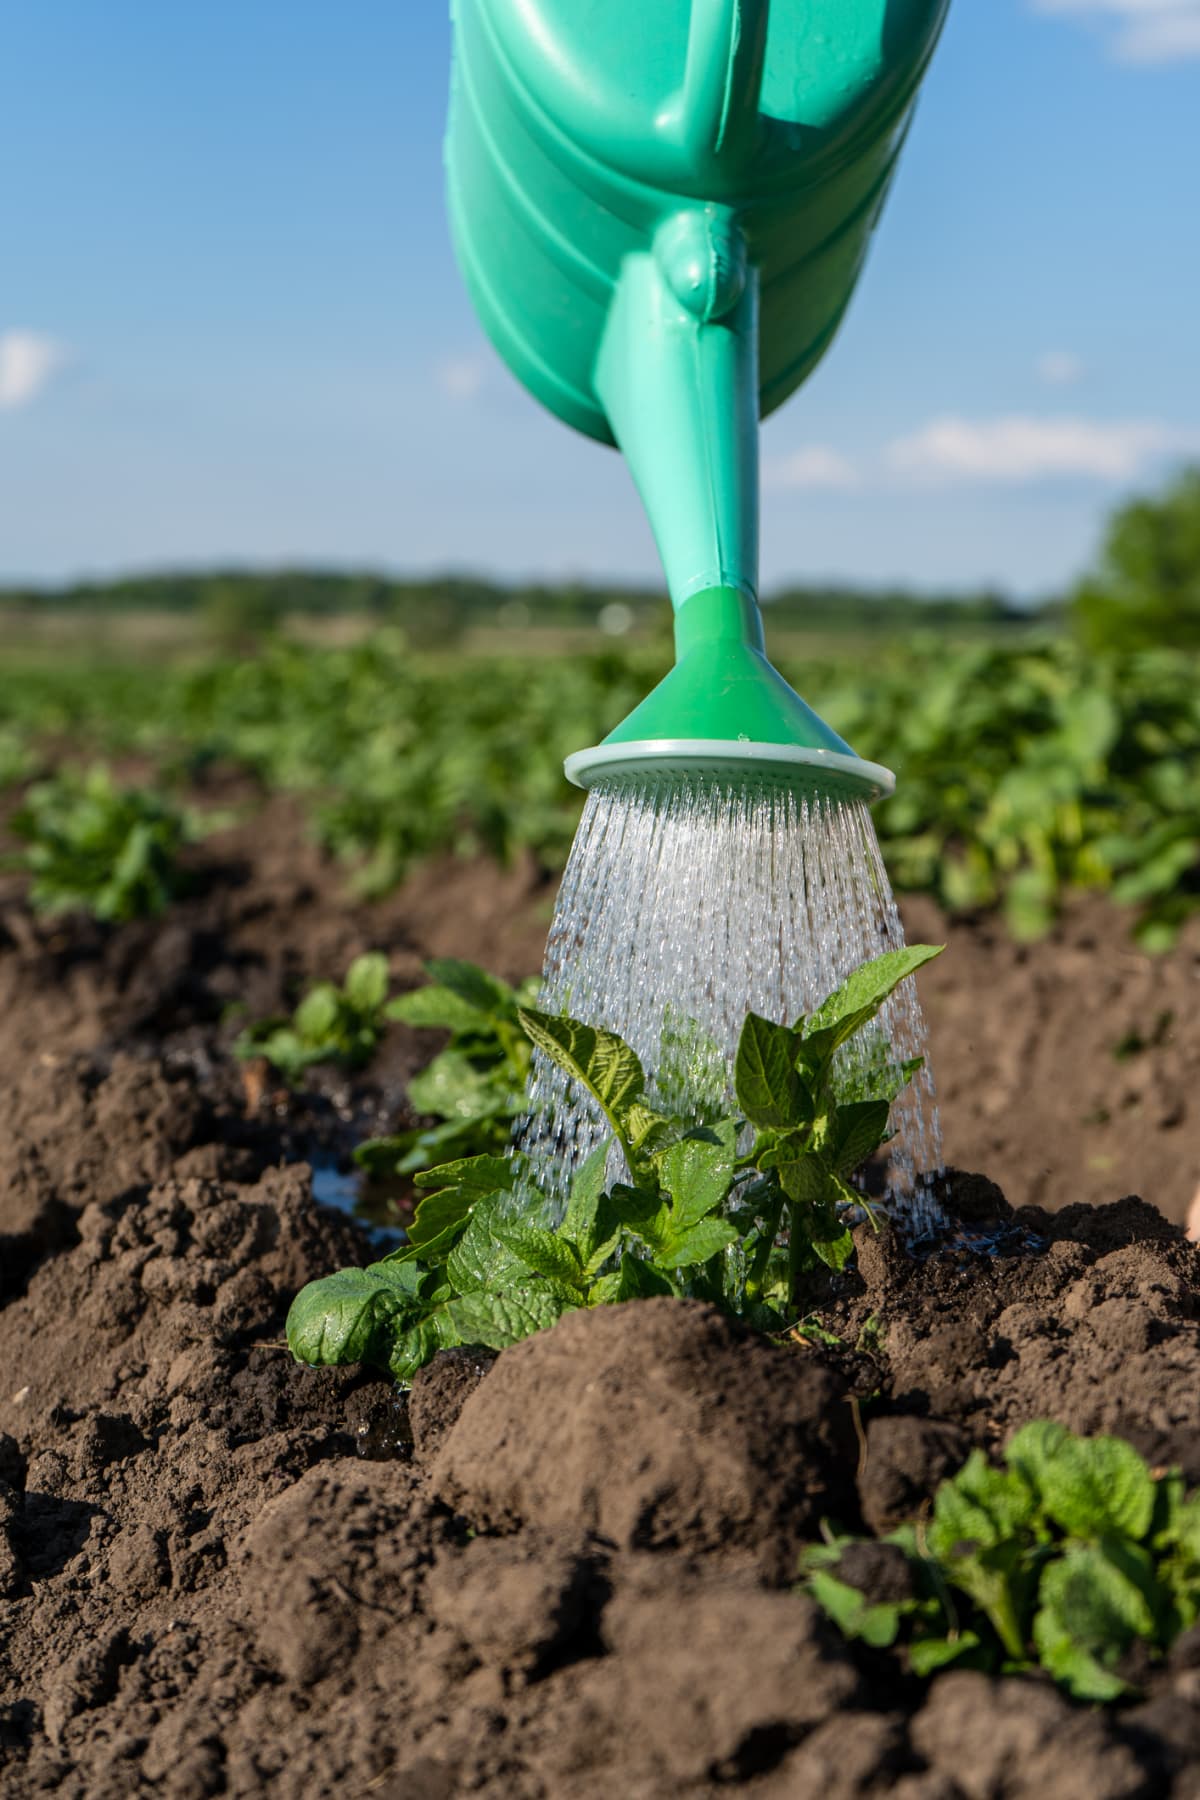 A plastic watering can pours water on the beds. Close-up of a bed of potatoes being watered from a watering can. High quality photo.